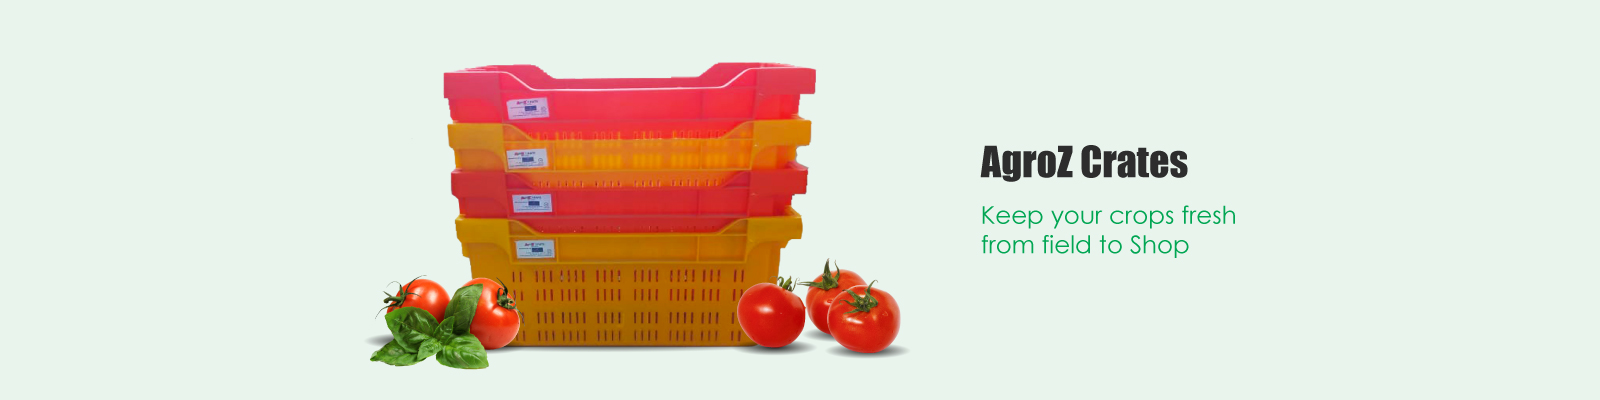 agroz crates - keep your crops fresh from field to shop